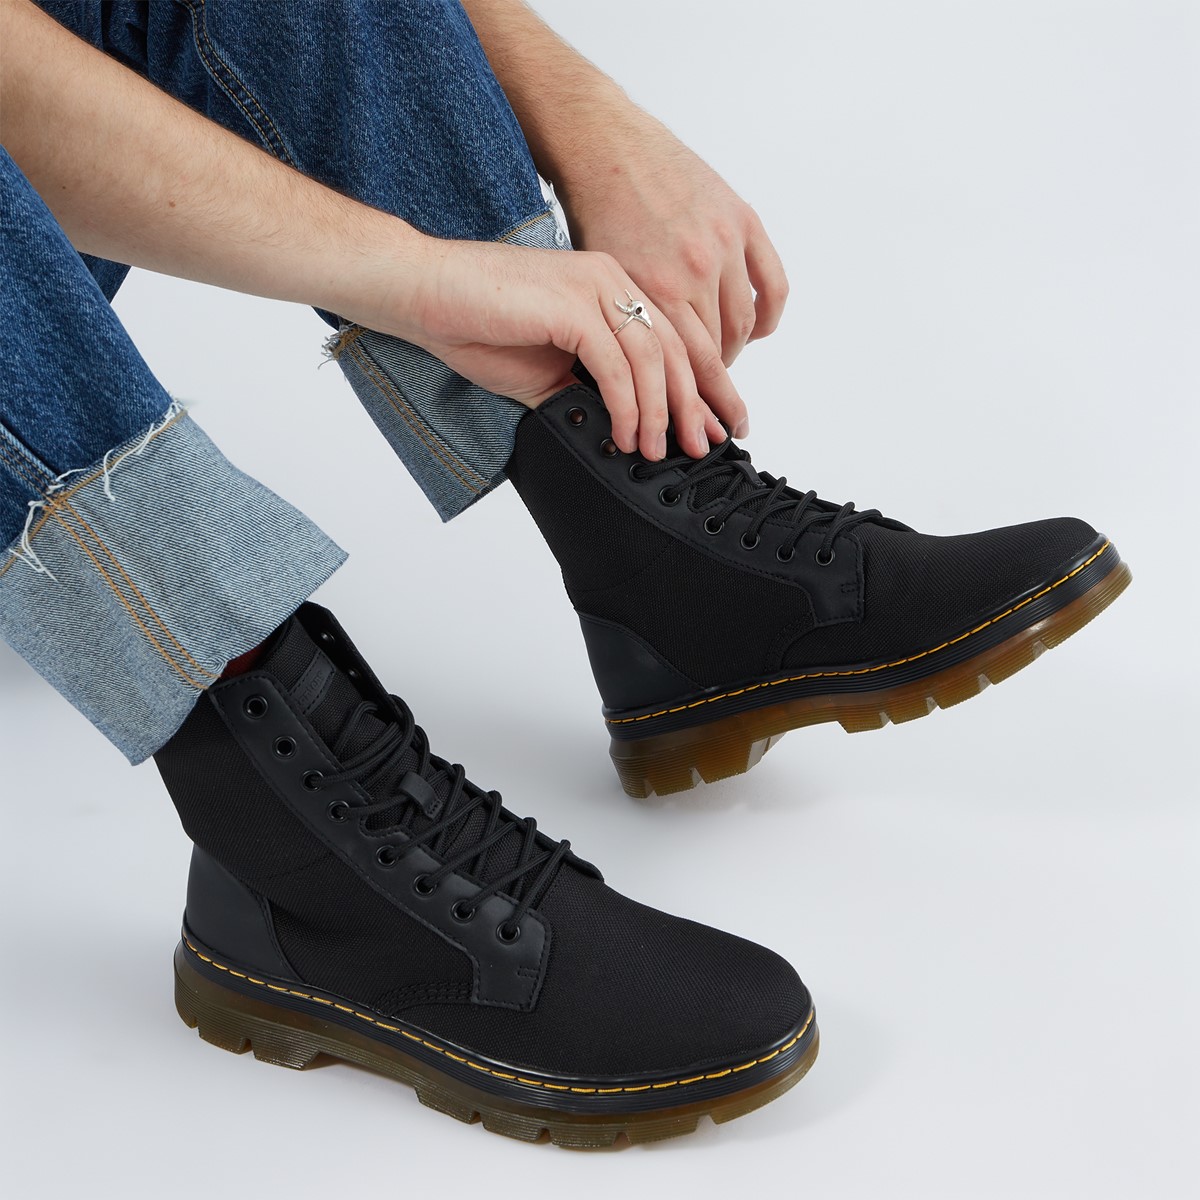 dr martens combs nylon review